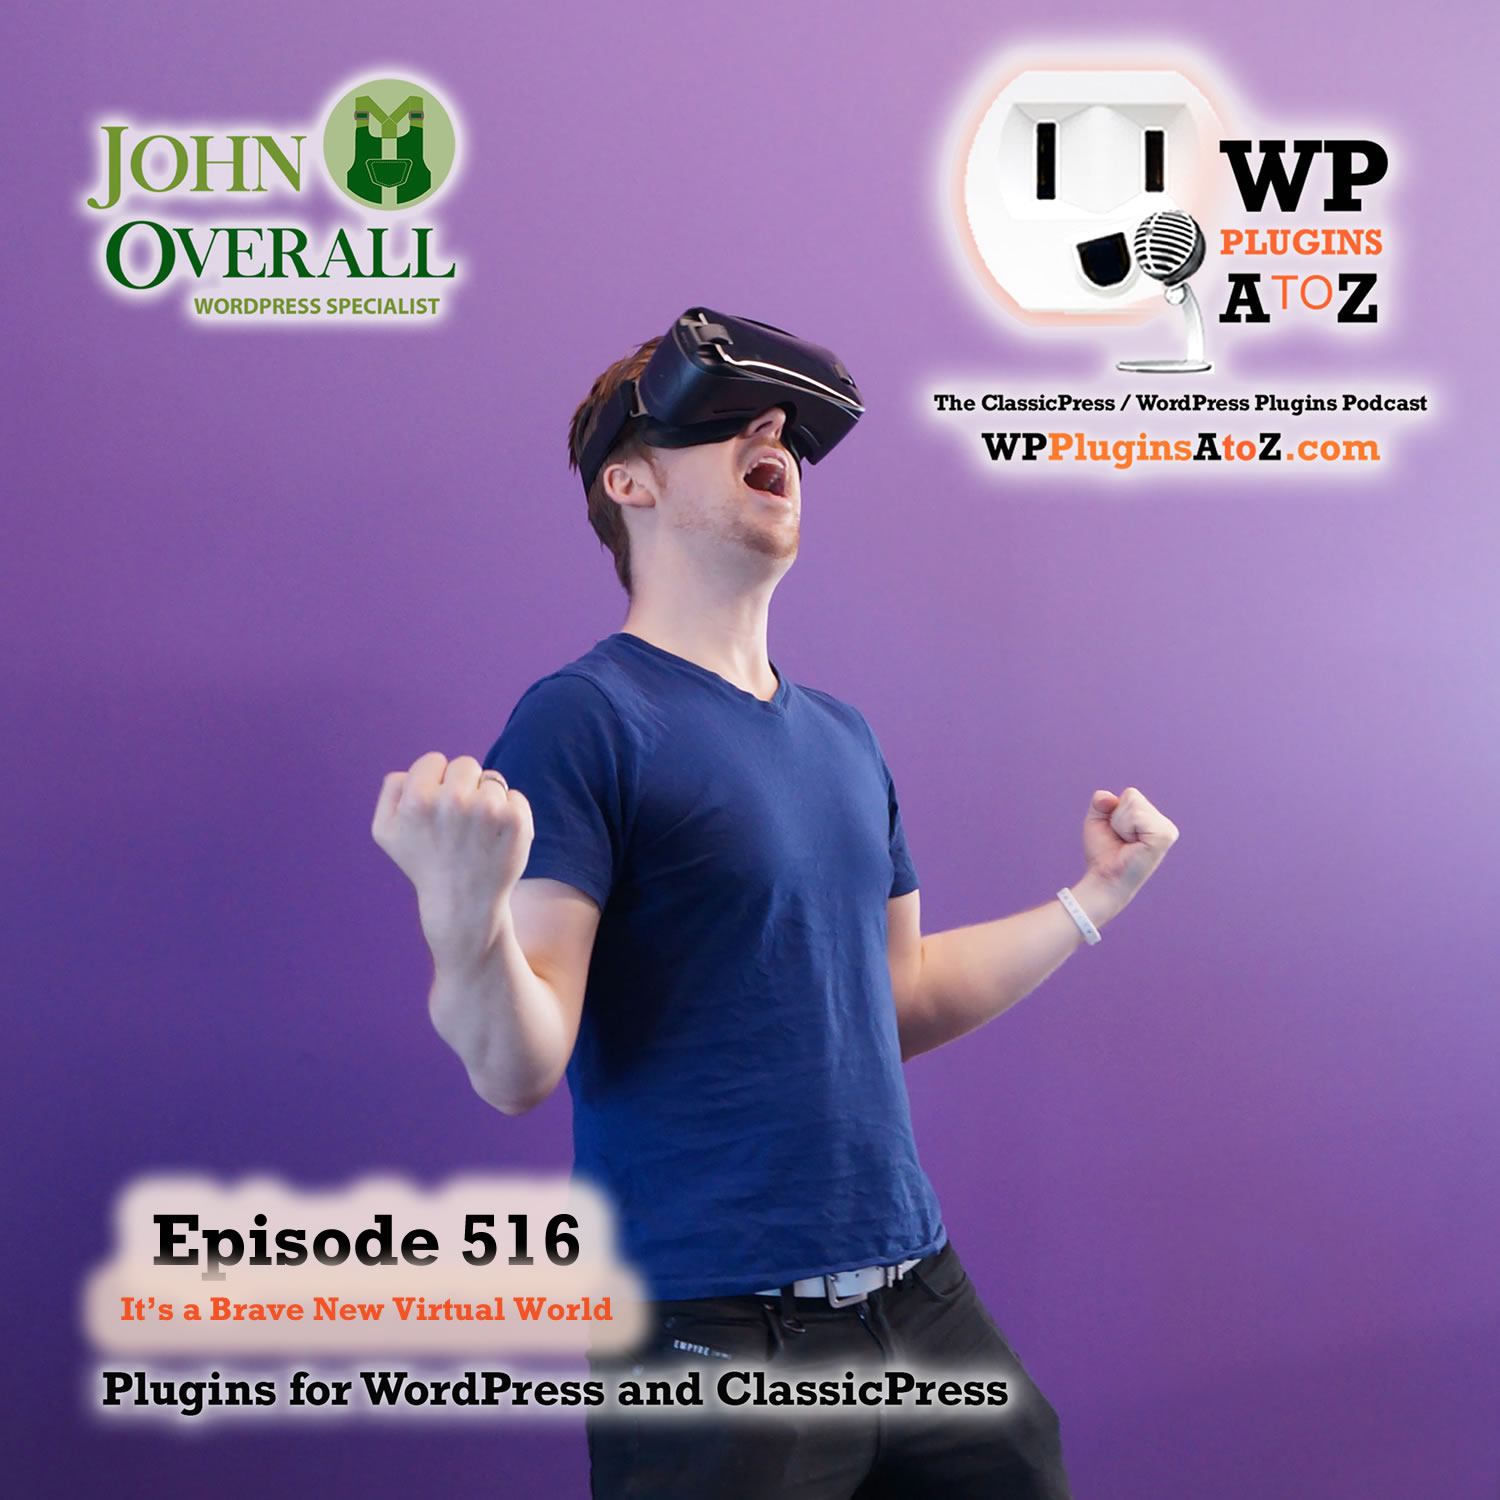 It's Episode 516 - We have plugins for Hero's, Videos, Pride, Image management, Stop Spammers, Wasting time ... and ClassicPress Options. It's all coming up on WordPress Plugins A-Z!